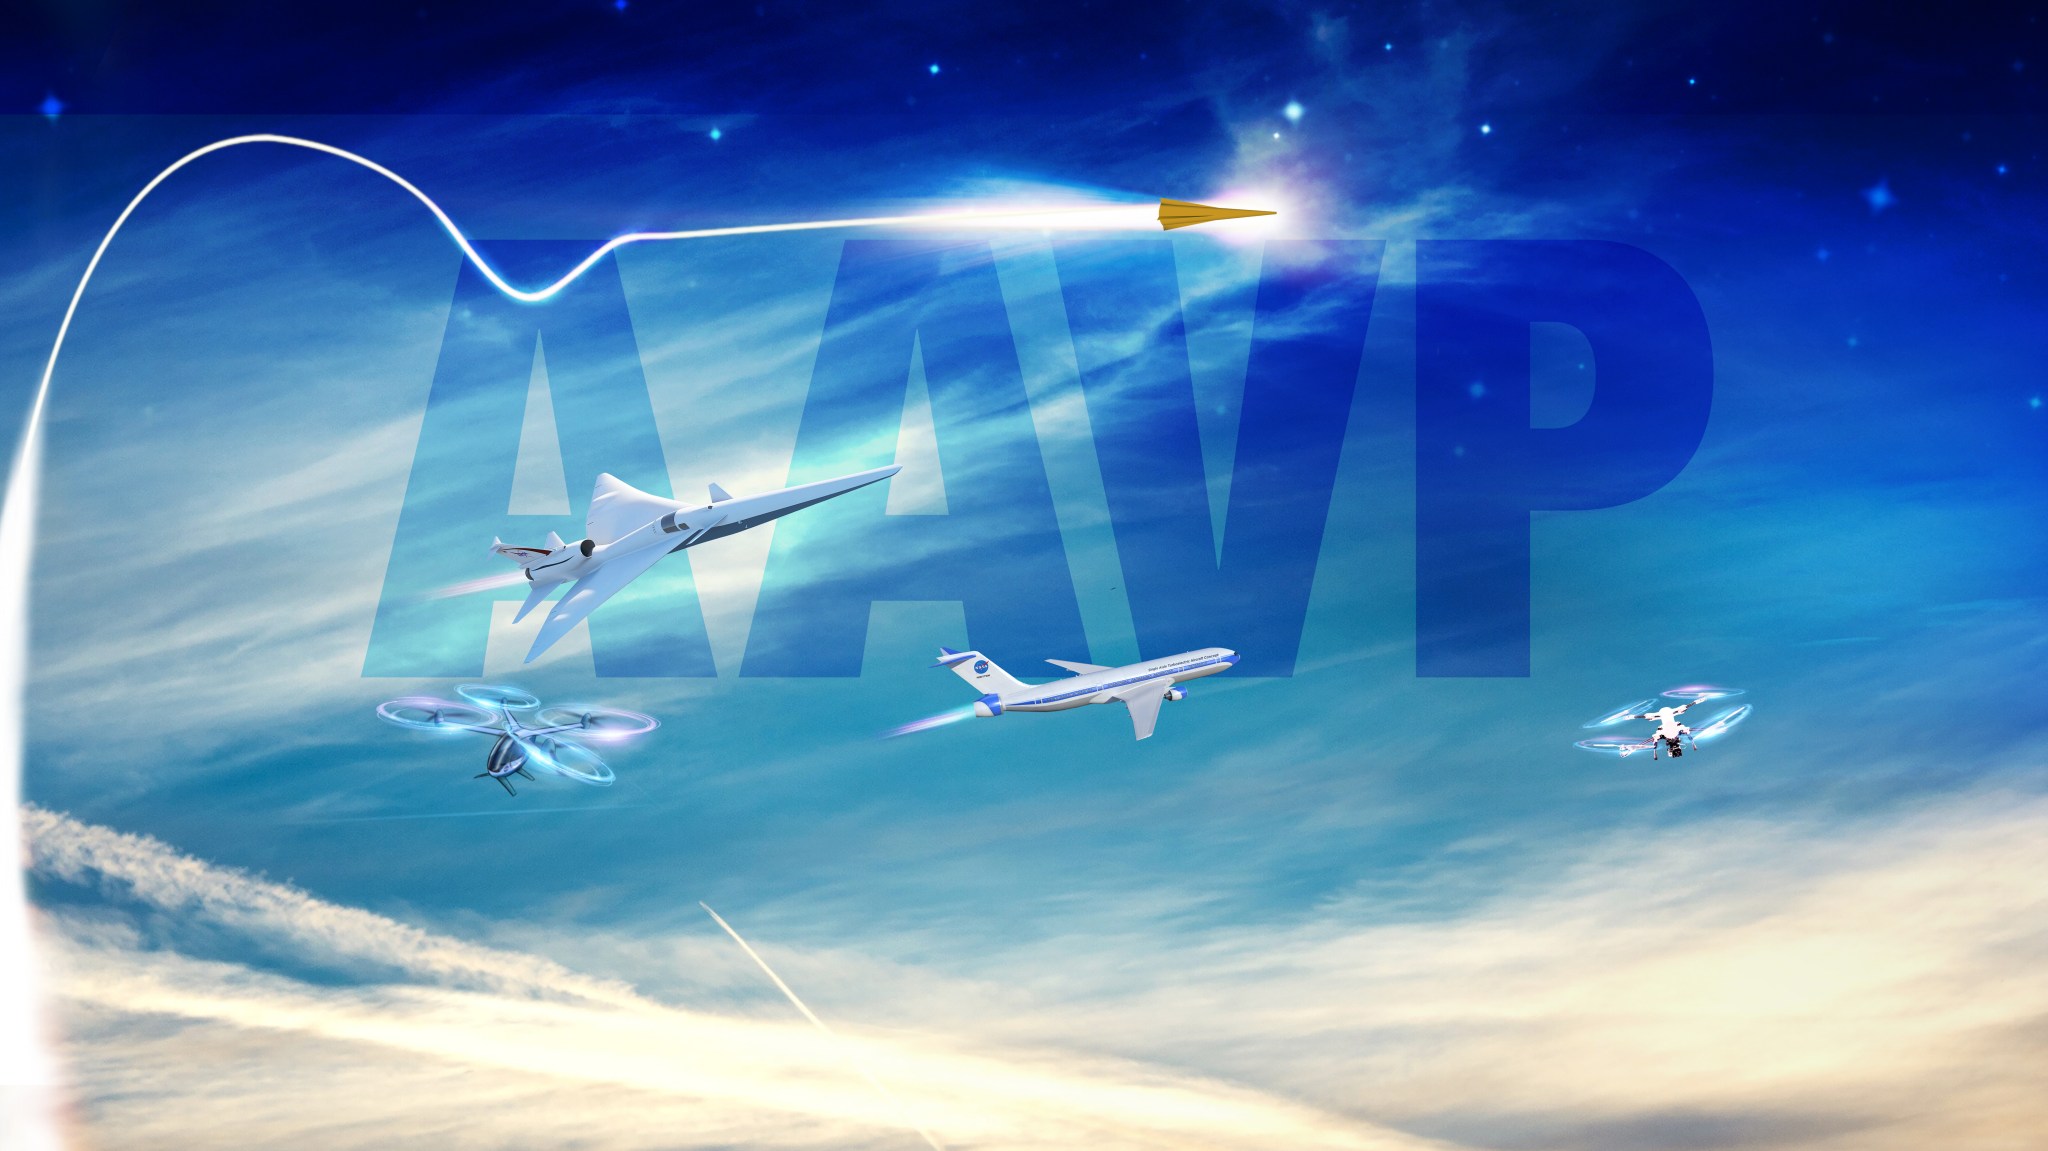 Artist illustration for the AAVP graphic, showing a sky with the letters AAVP screened back and a hypersonic vehicle, a supersonic vehicle, an electric vehicle as well as two drones in flight against the blue sky.